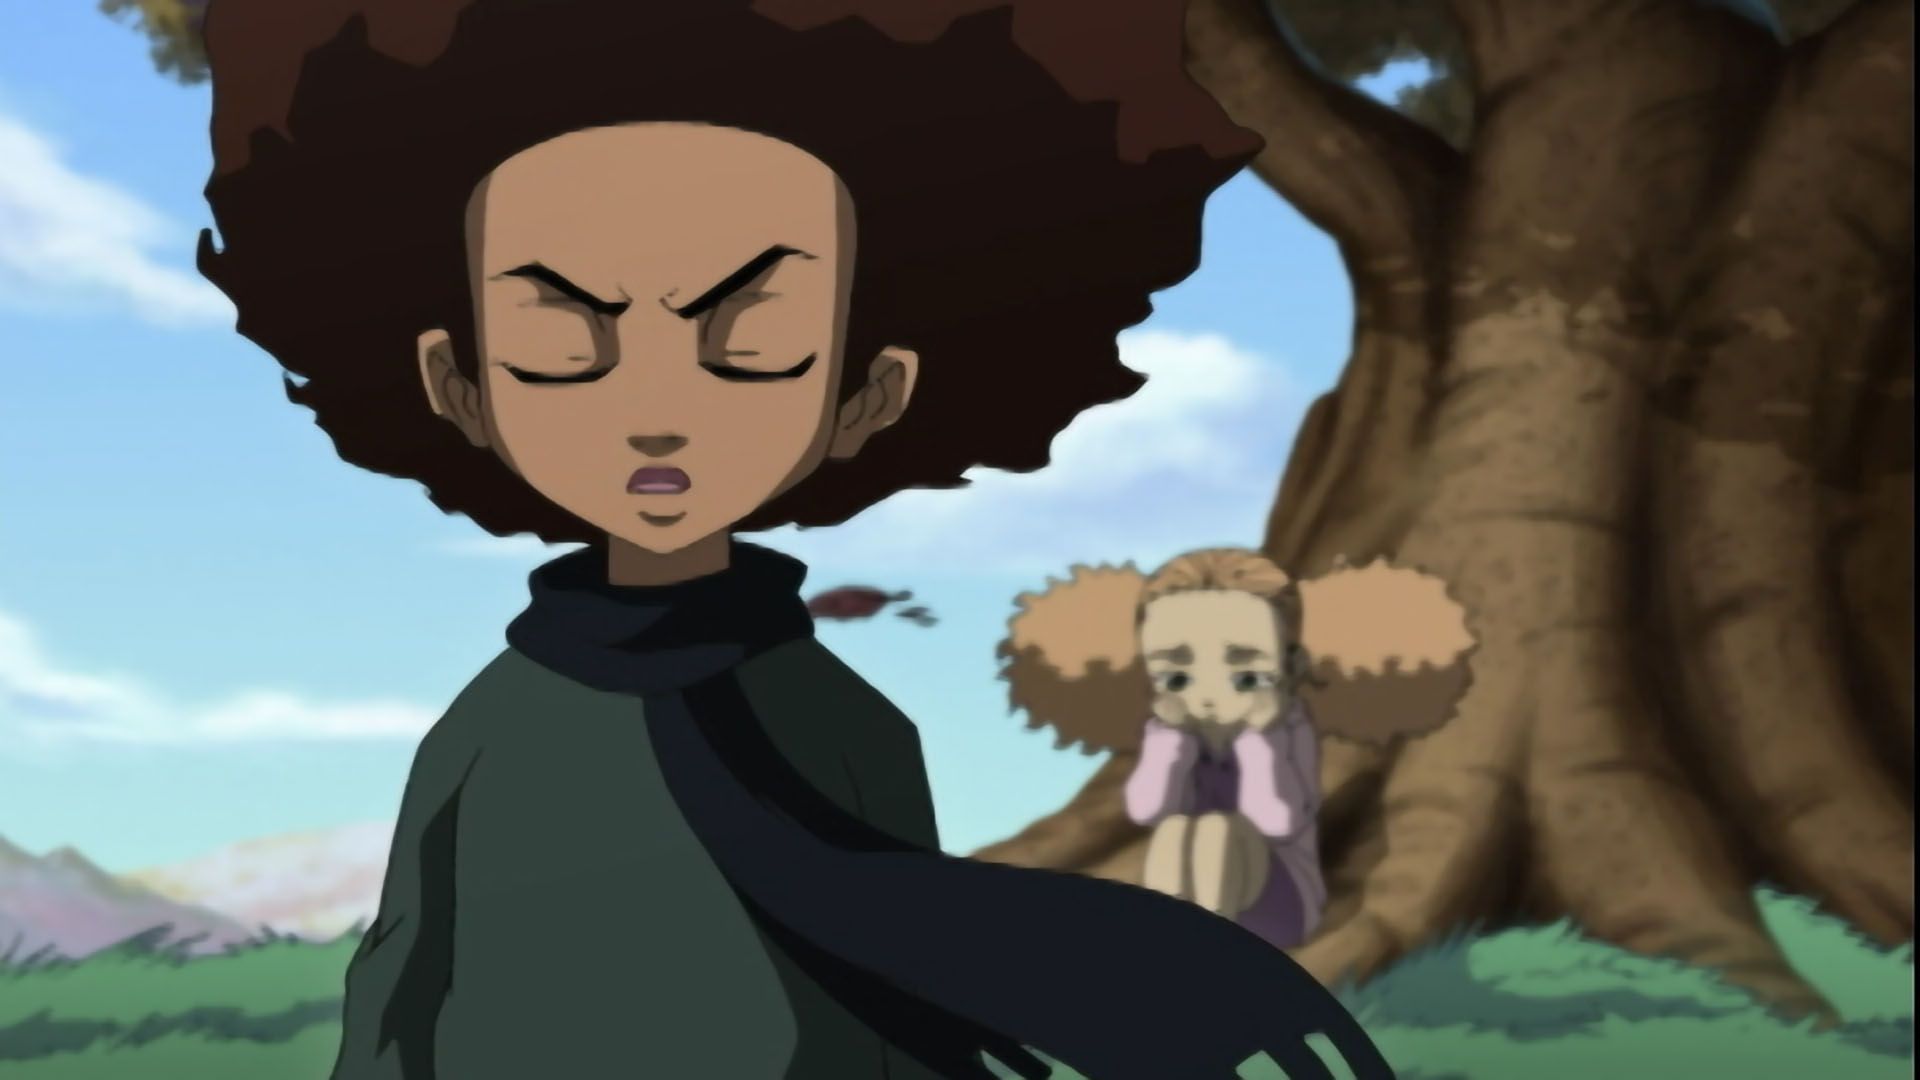 Watch the boondocks show online full episodes for free. 